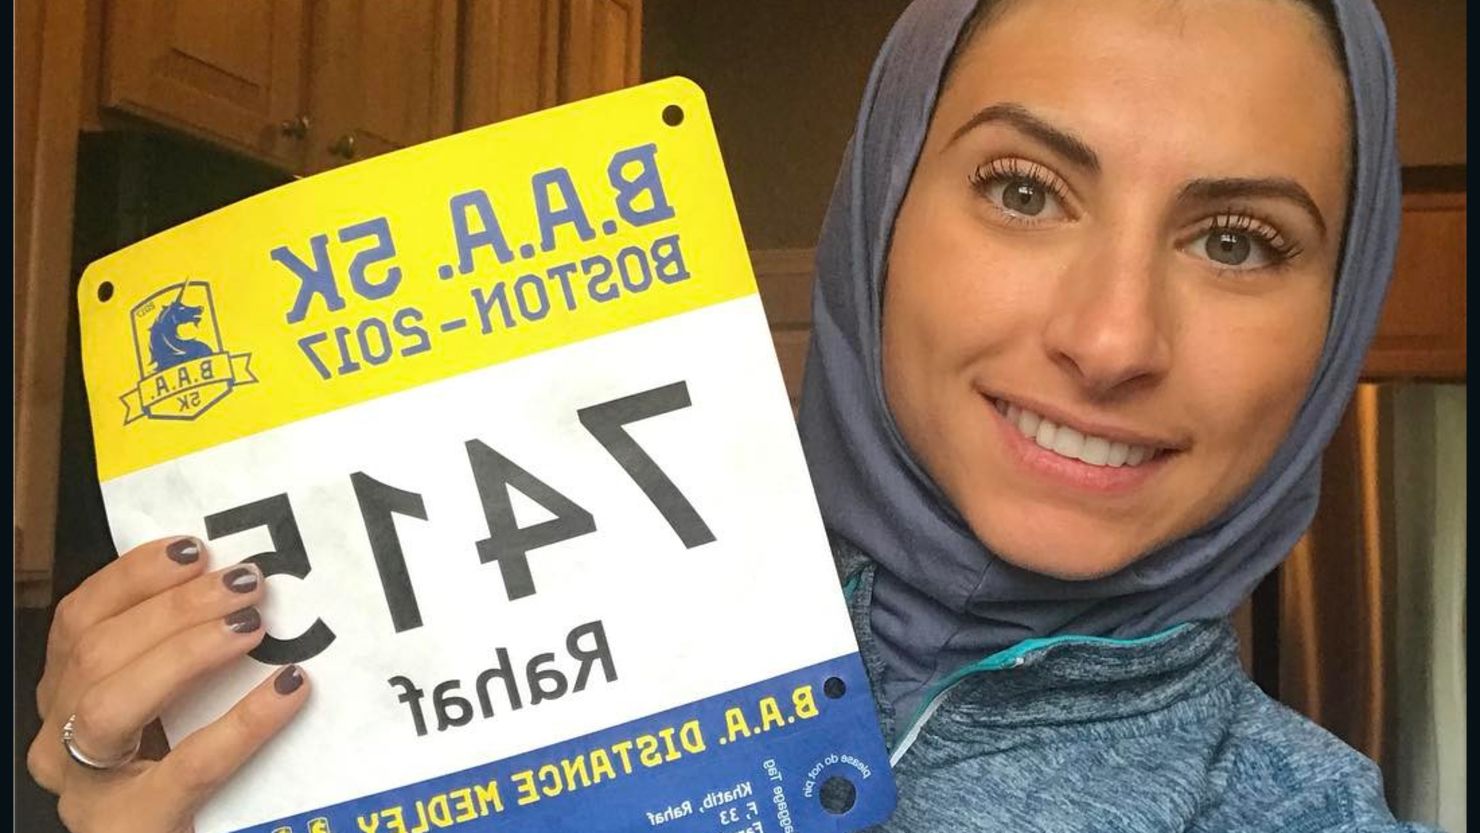 Rahaf Khatib garnered thousands of followers on Instagram after she appeared on the cover of Women's Running magazine.